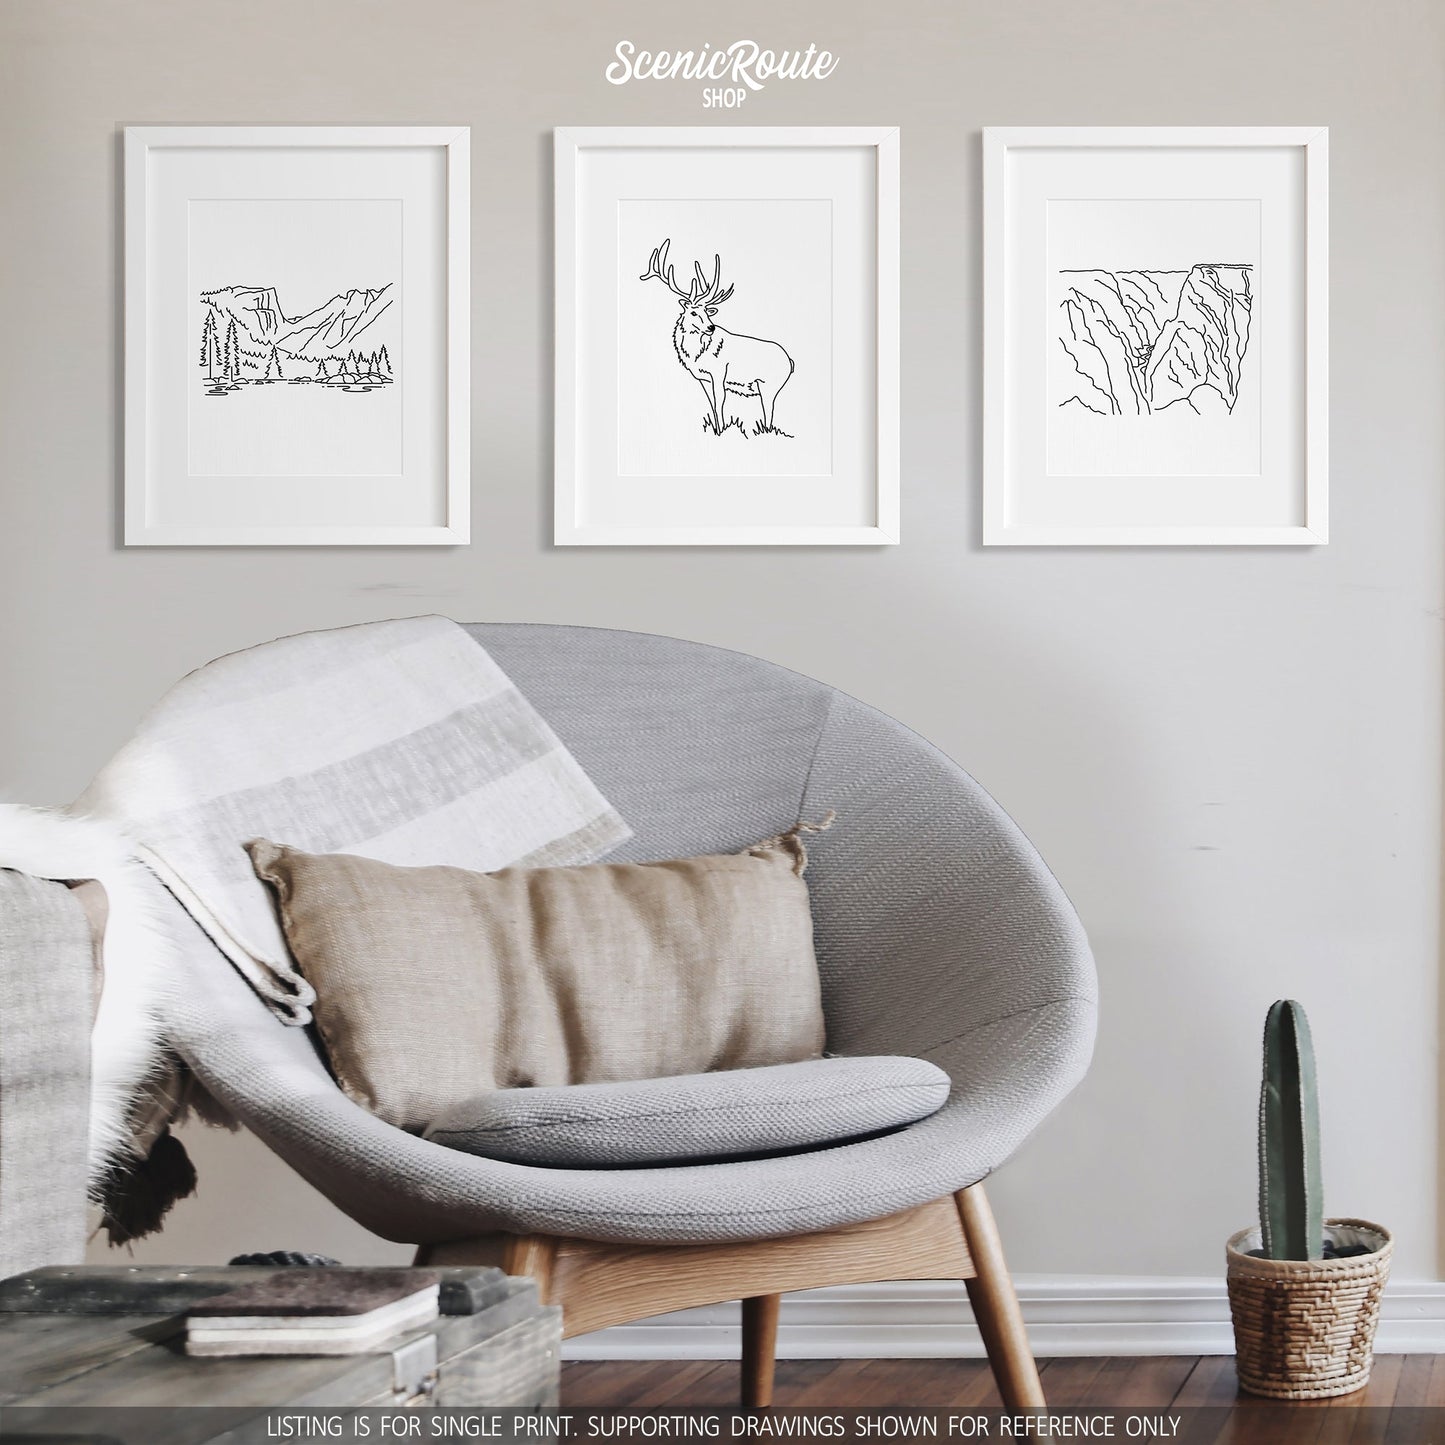 A group of three framed drawings on a white wall above a round chair. The line art drawings include Rocky Mountain National Park, an Elk, and Black Canyon of the Gunnison National Park